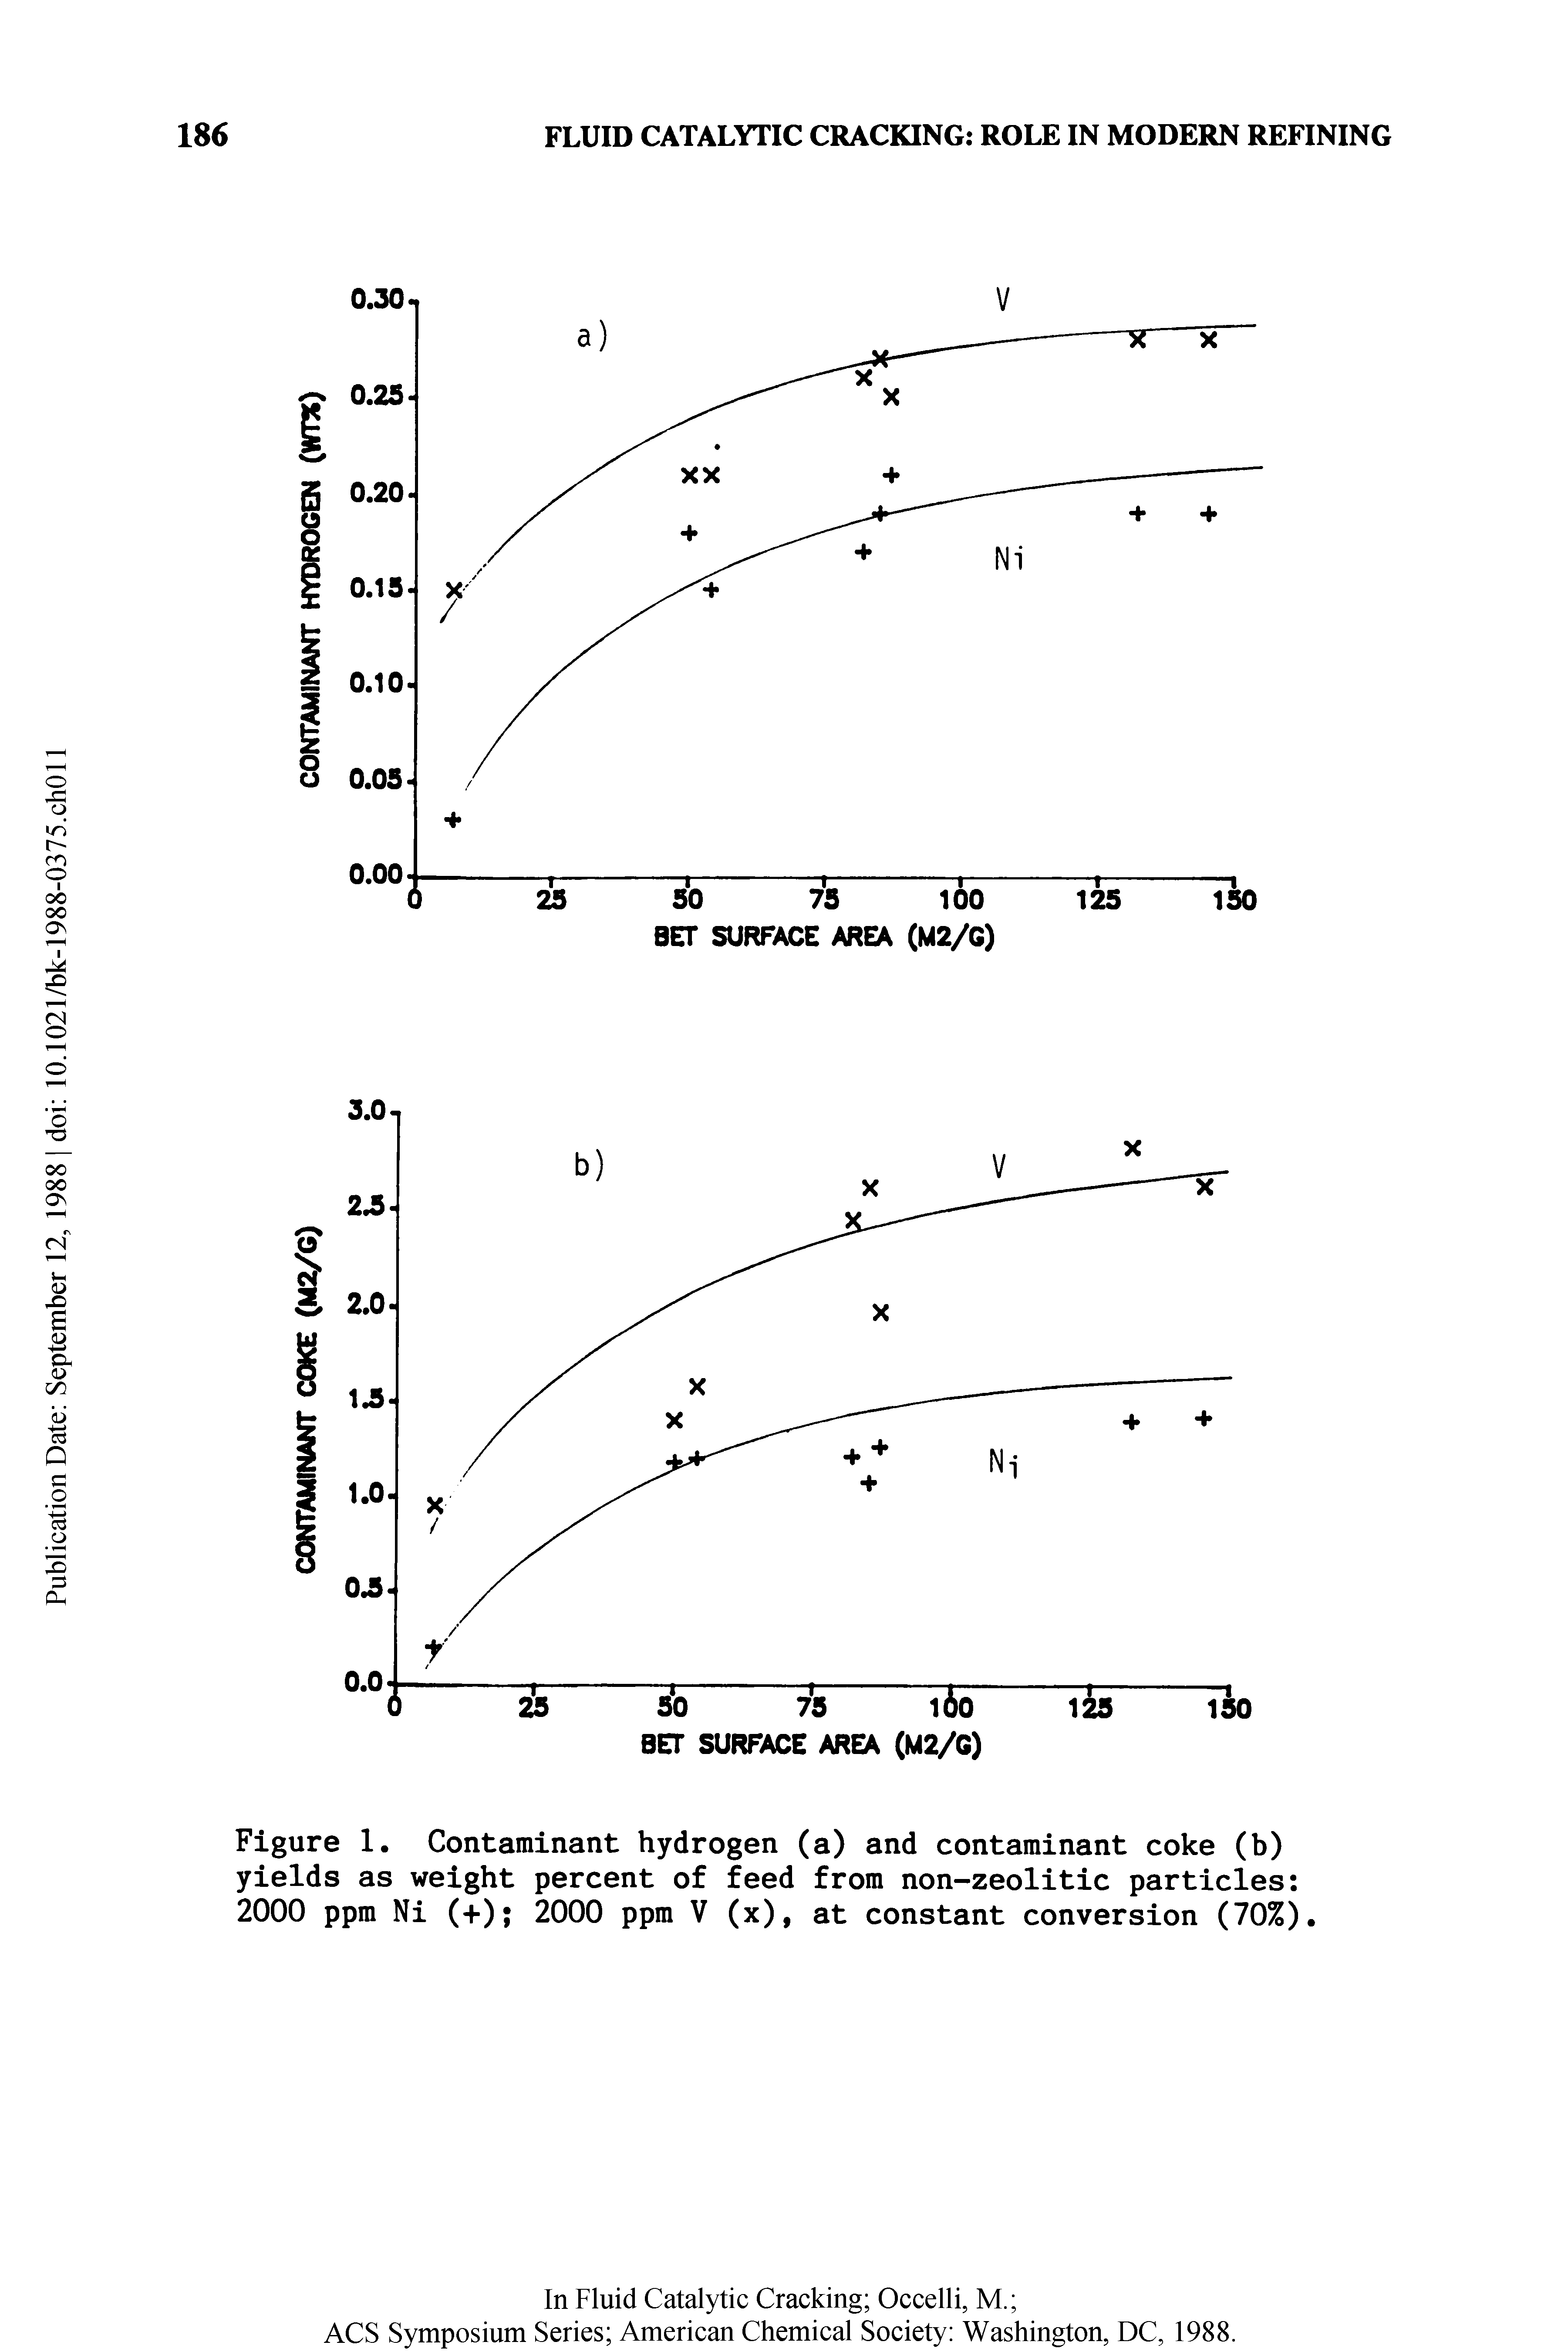 Figure 1. Contaminant hydrogen (a) and contaminant coke (b) yields as weight percent of feed from non-zeolitic particles 2000 ppm Ni (+) 2000 ppm V (x), at constant conversion (70%).